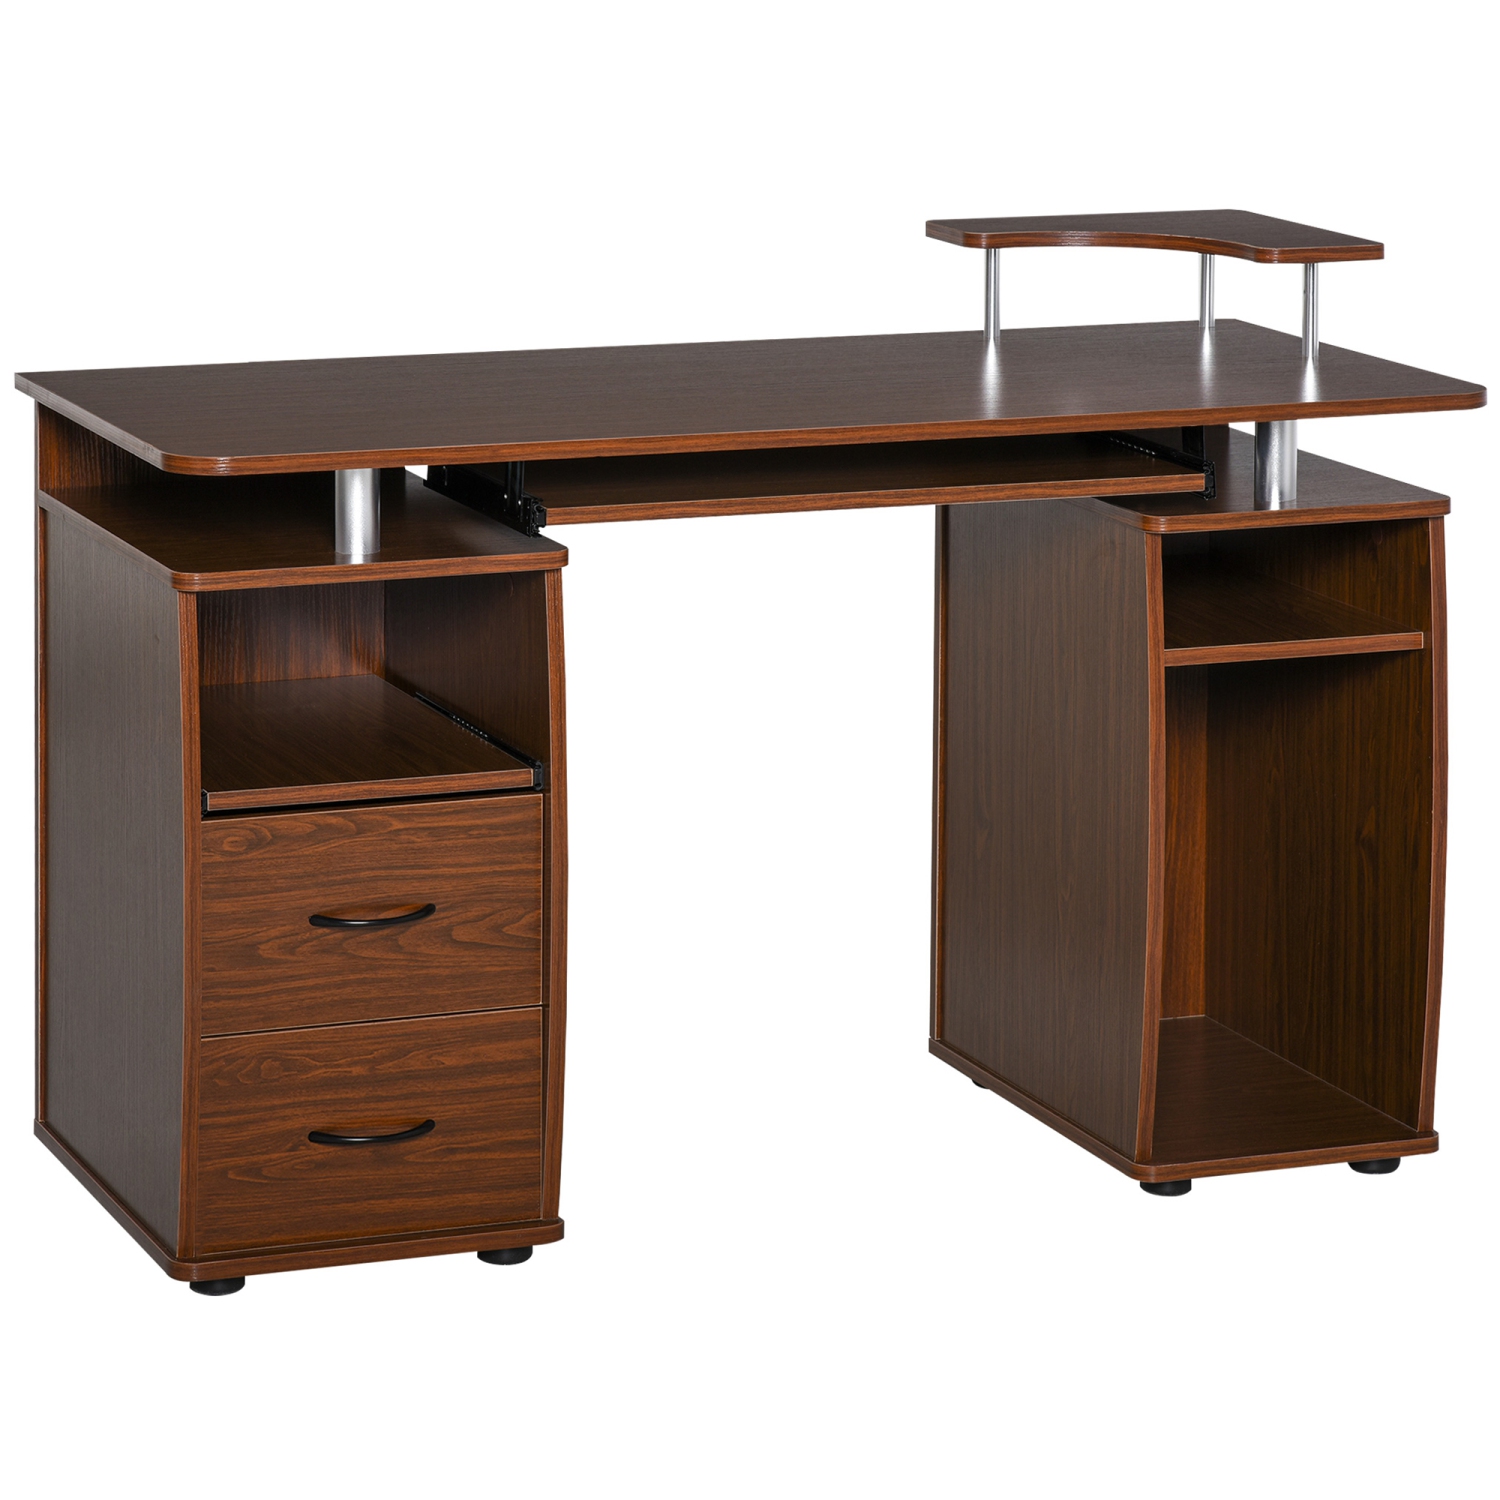 HOMCOM Computer Desk with Keyboard Tray, CPU Stand, Writing Desk with Drawers, Workstation for Home Office, Walnut Brown